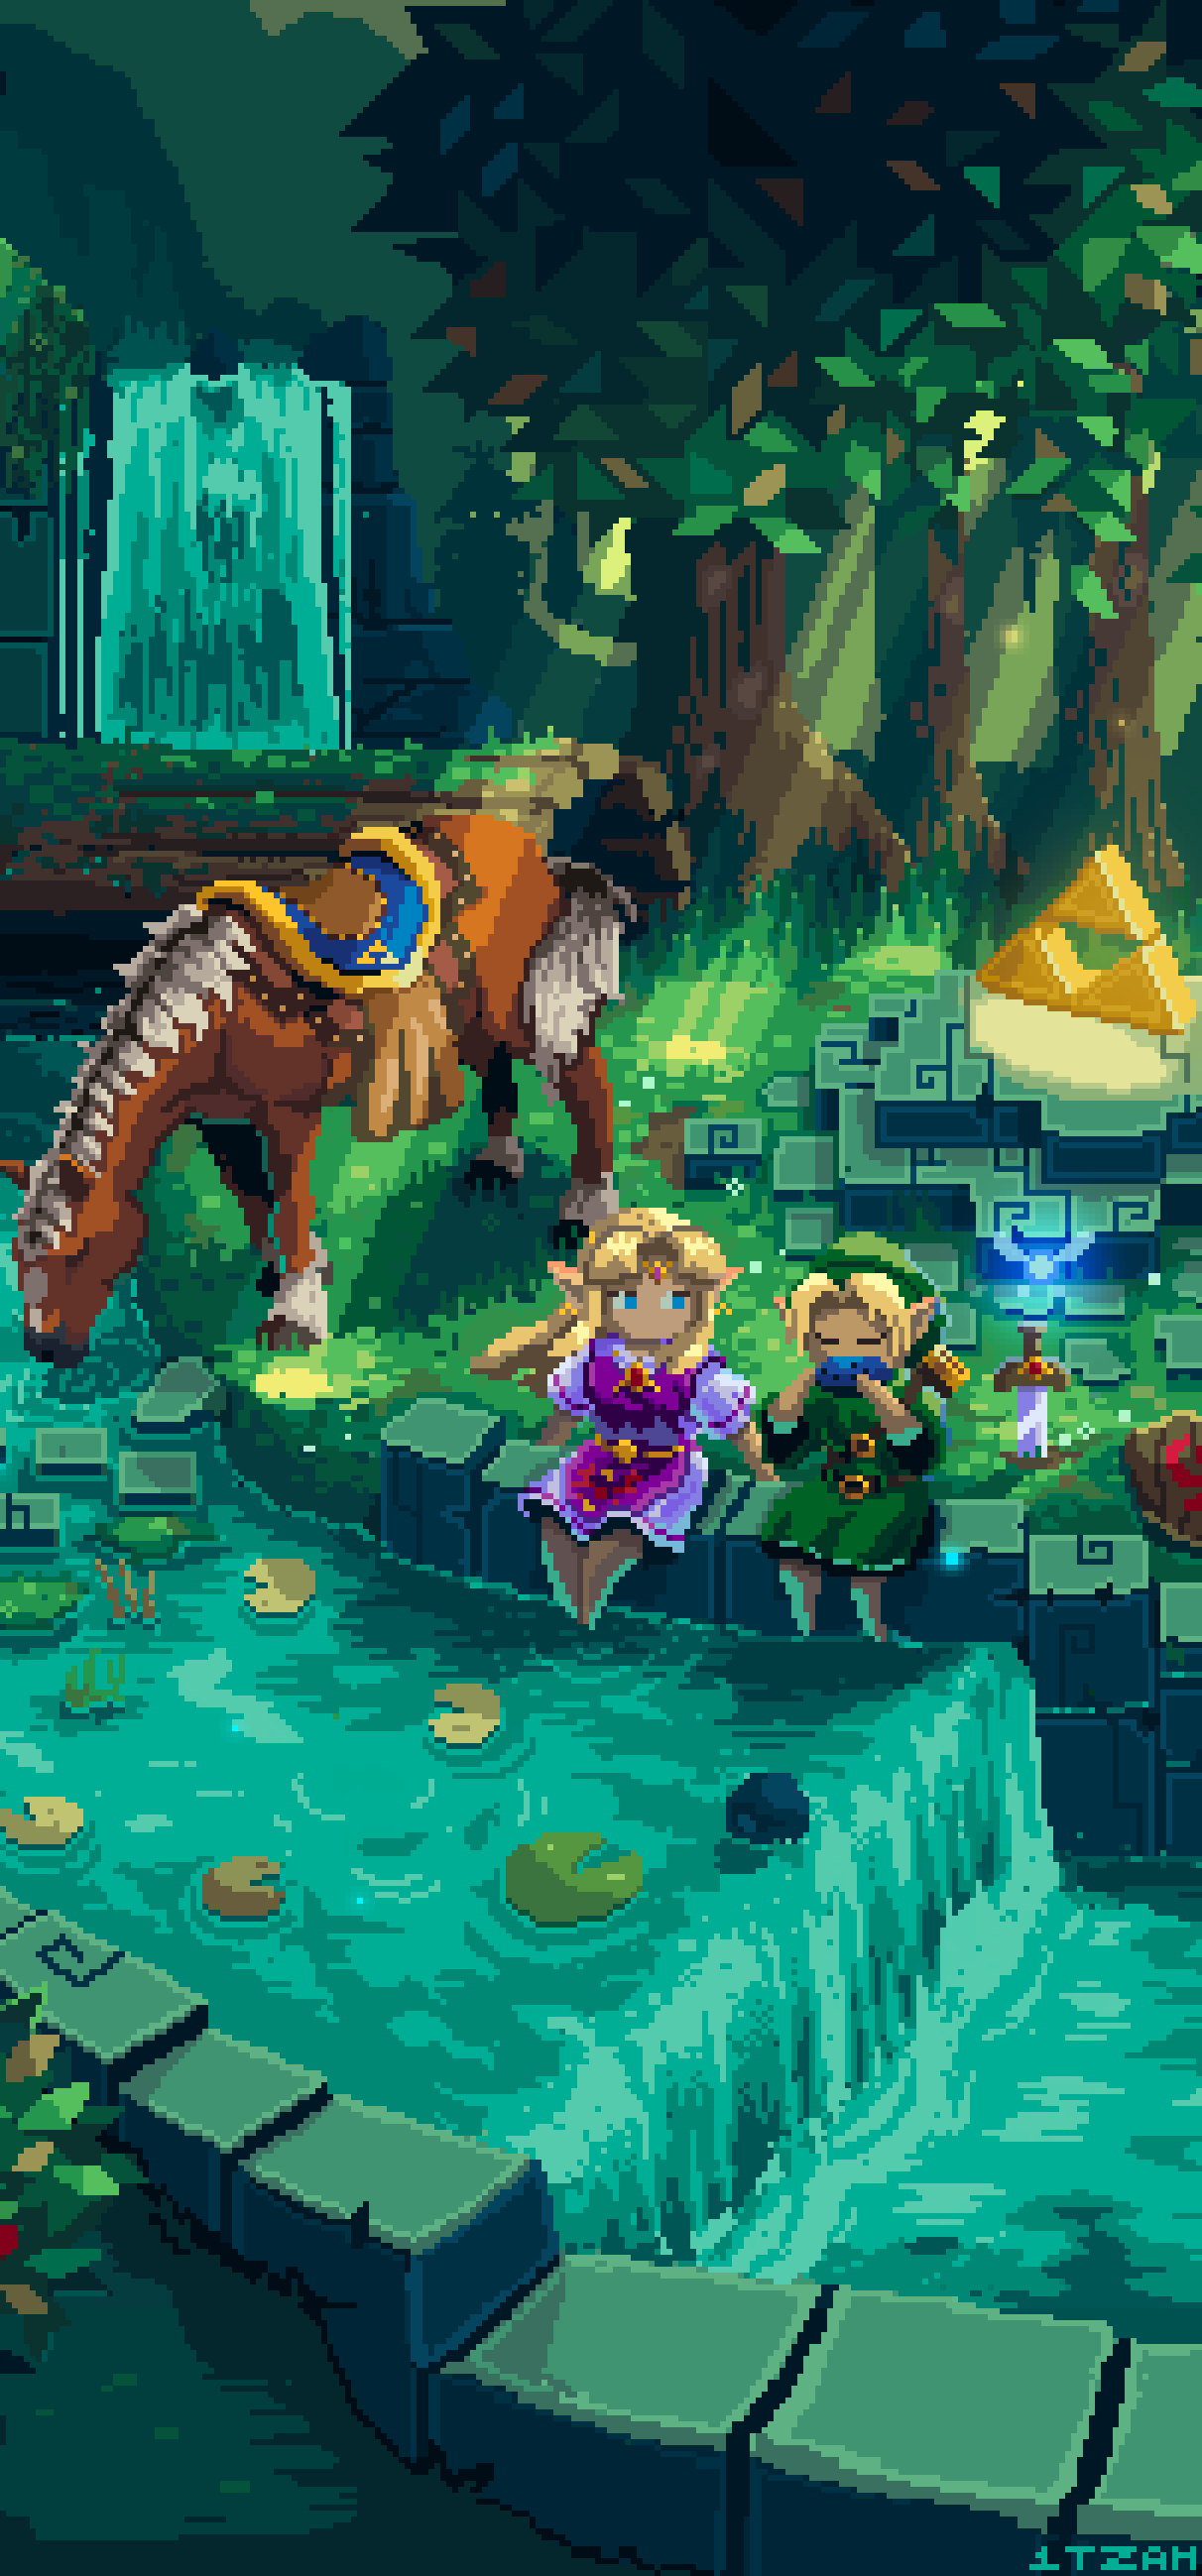 1boy 1girl absurdres animal artist_name blinking blonde_hair blue_eyes closed_eyes deku_shield dress english_text epona fairy green_tunic heads-up_display heart highres holding holding_instrument horse instrument itzah leaf light_rays lily_pad link log long_hair music navi ocarina outdoors partially_submerged pixel_art planted planted_sword playing_instrument pointy_ears princess_zelda purple_dress saddle shield sitting sunbeam sunlight sword the_legend_of_zelda the_legend_of_zelda:_ocarina_of_time tree triforce water weapon wooden_shield